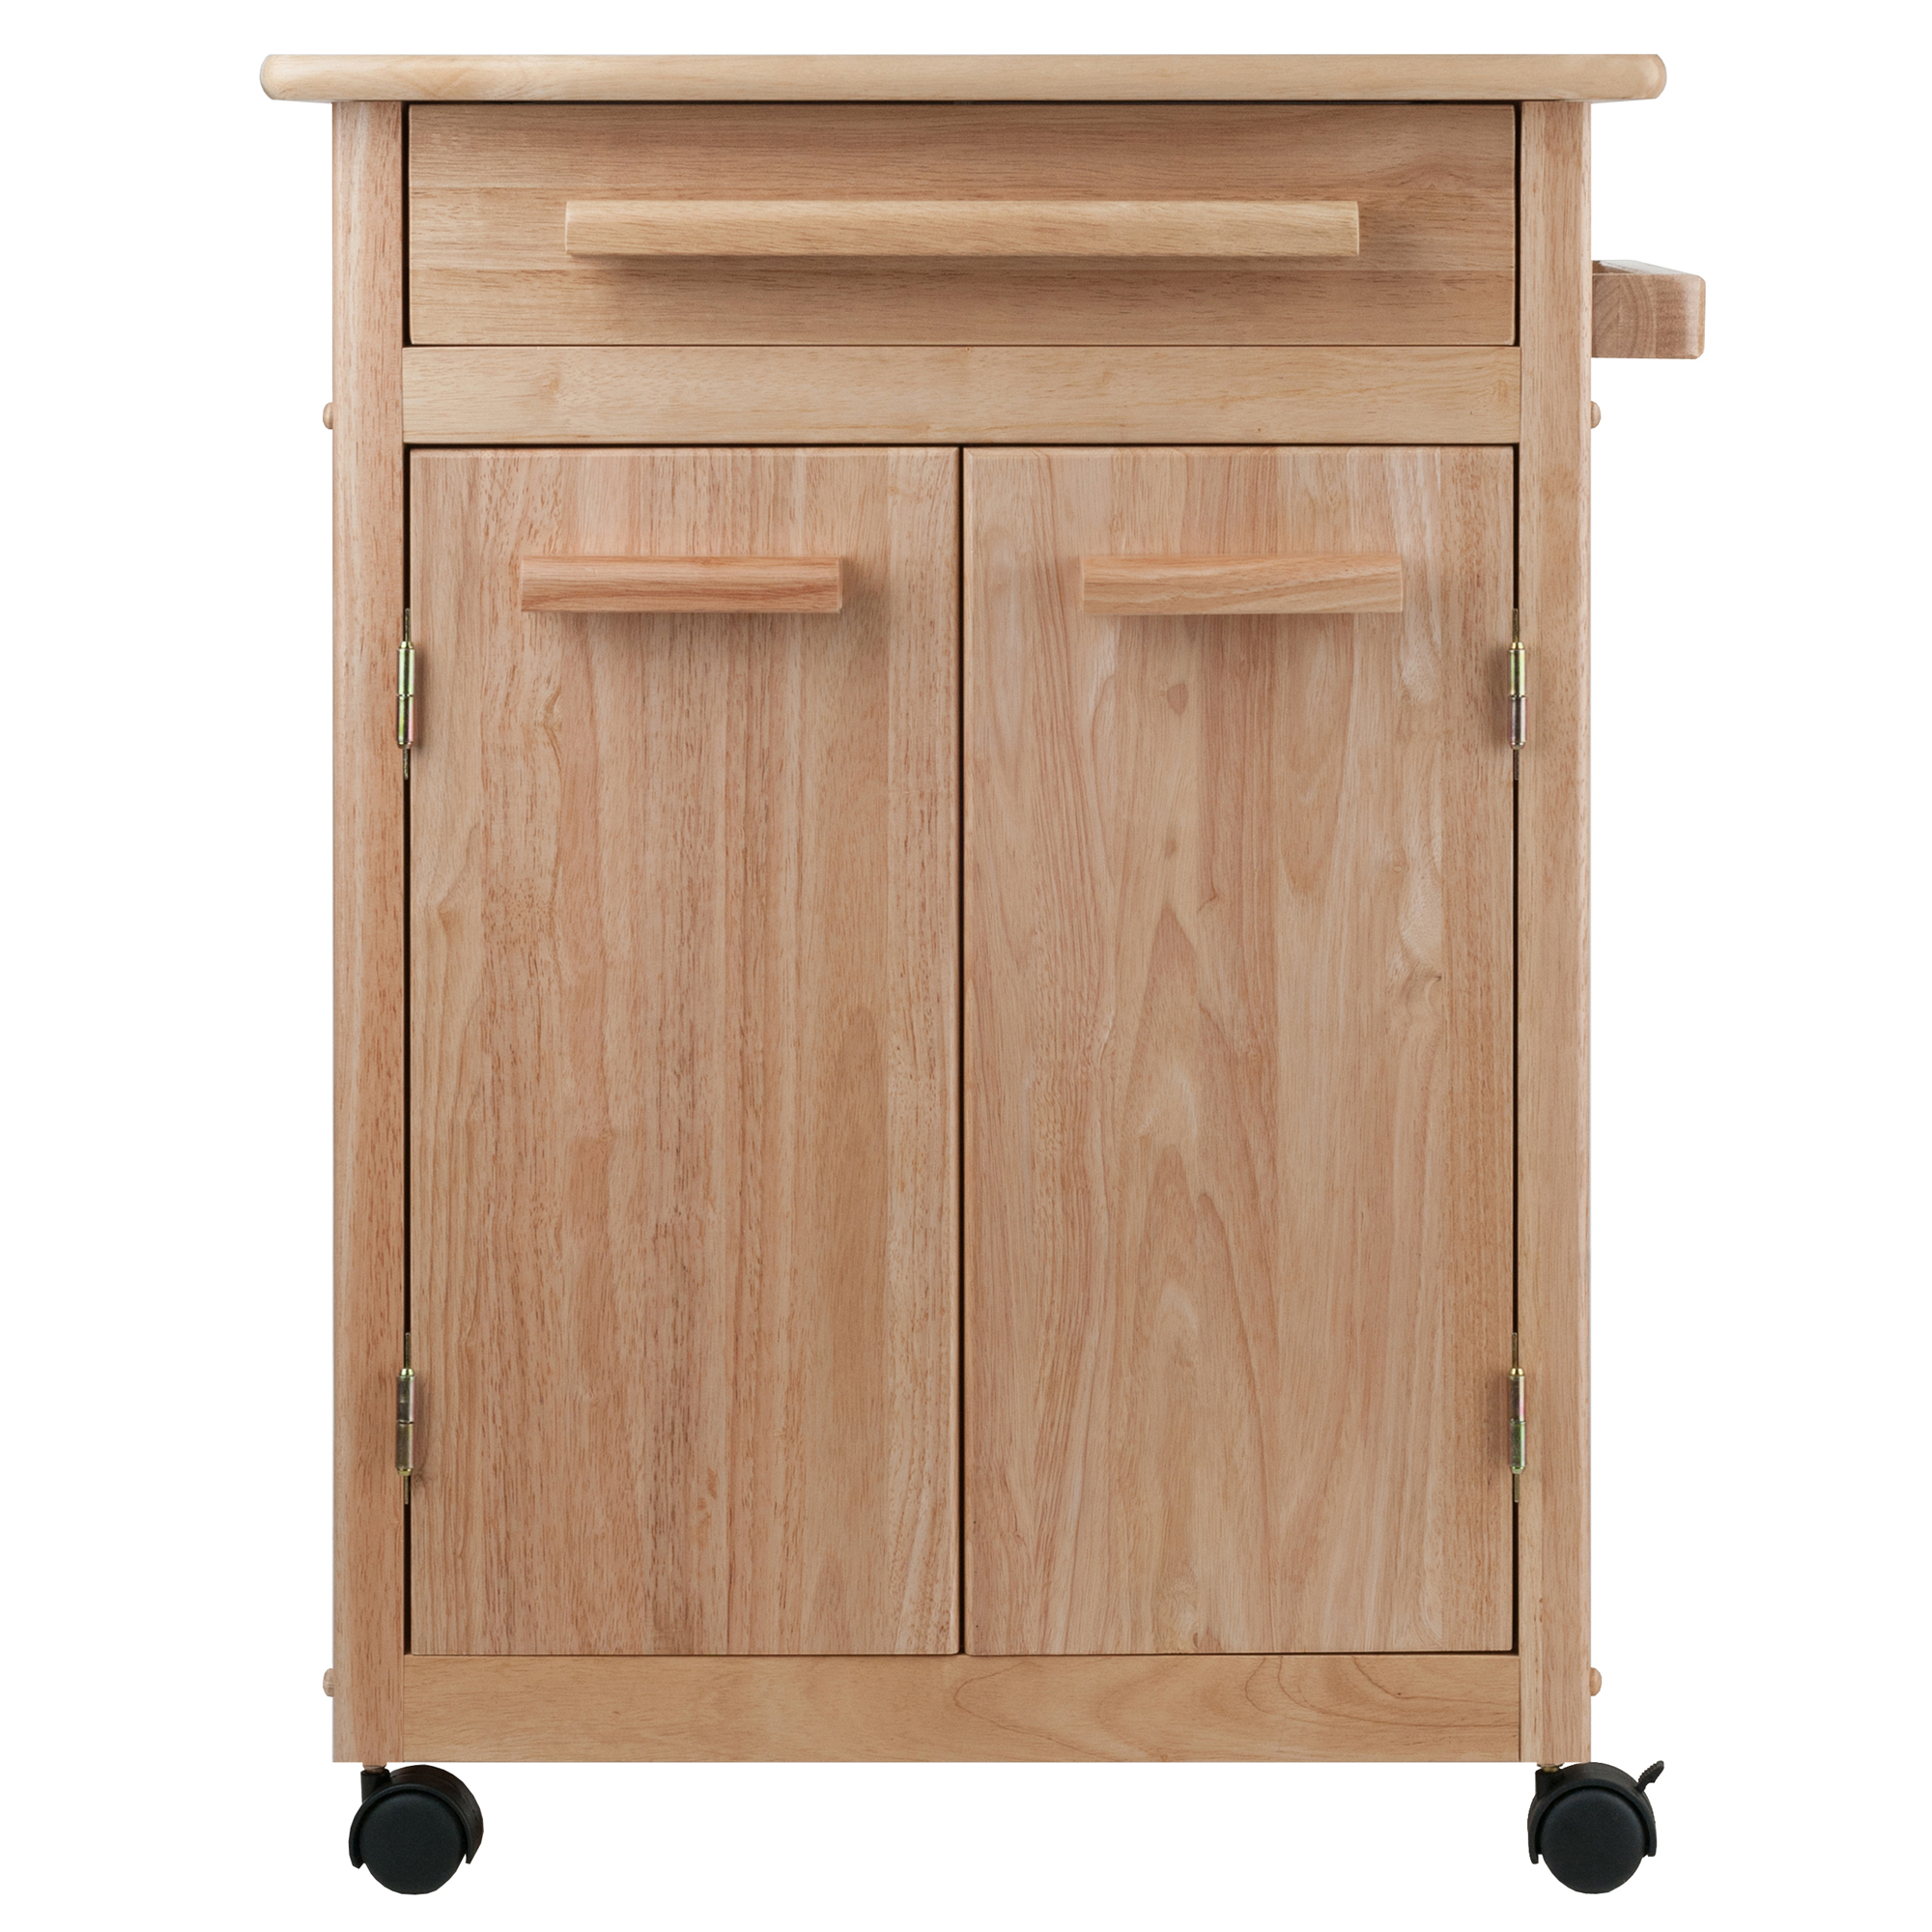 Winsome Wood Hackett Kitchen Utility Cart, Natural Finish - image 5 of 11